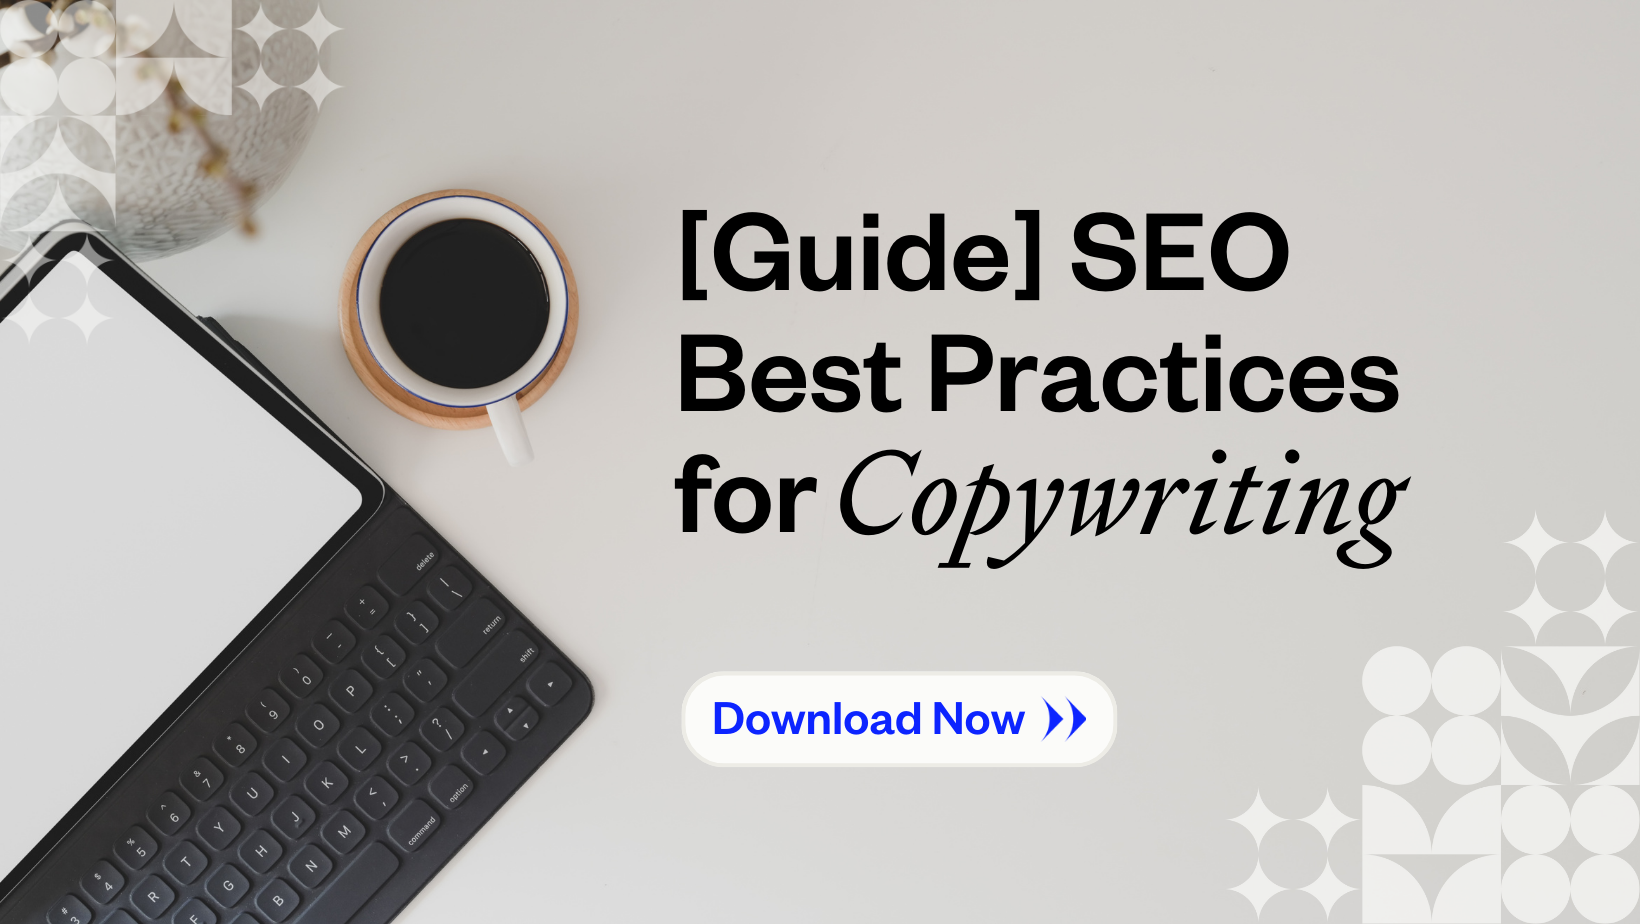 CTA button for SEO Best Practices for Copywriting